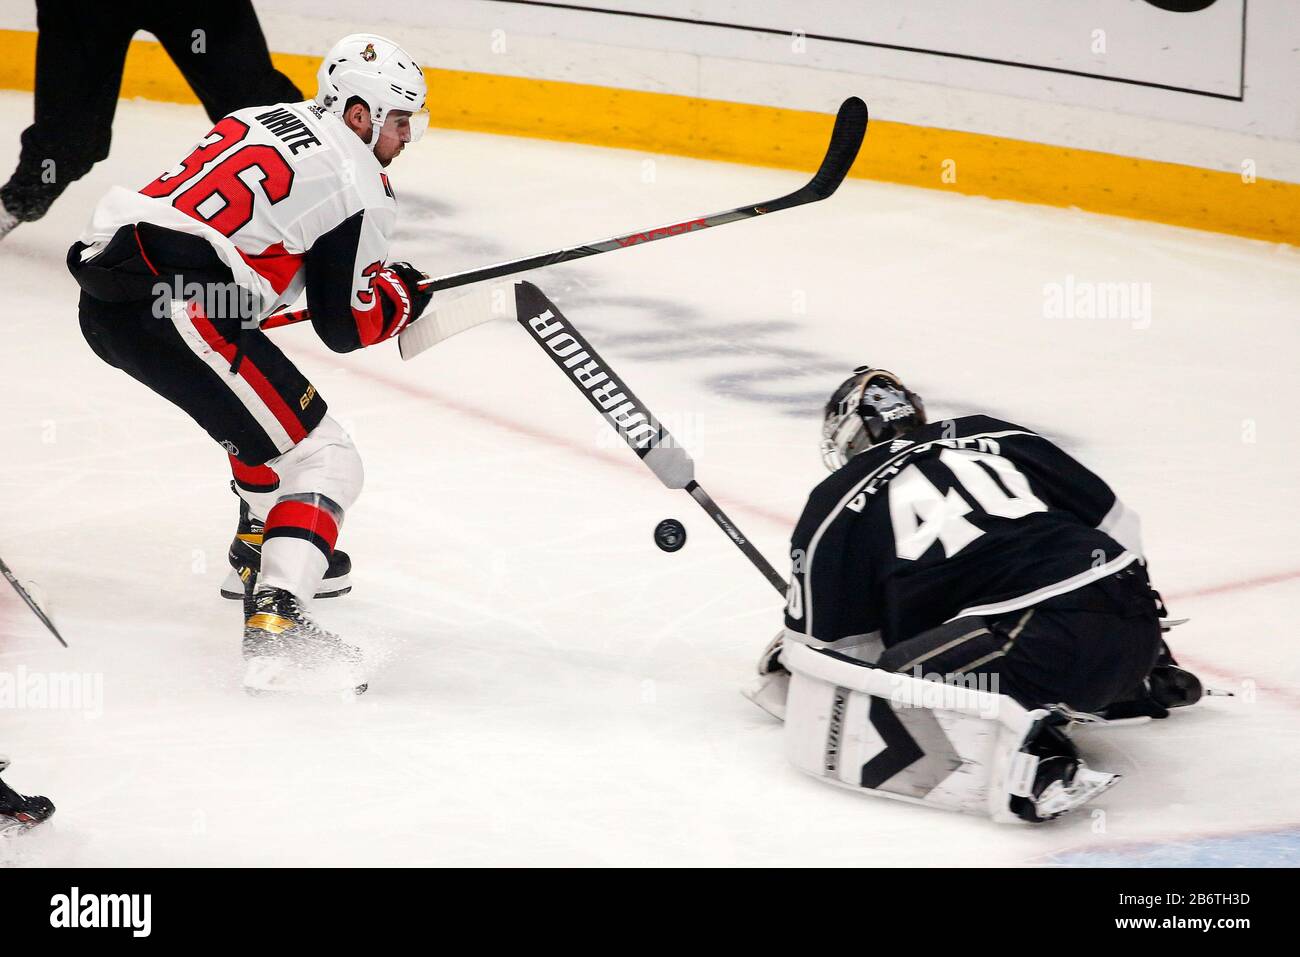 Los Angeles, California, USA. 11th Mar, 2020. Los Angeles Kings goalie Calvin Petersen (40) makes a save shot by Ottawa Senators' forward Colin White (36) during a 2019-2020 NHL hockey game between Los Angeles Kings and Ottawa Senators in Los Angeles, on March 11, 2010. Credit: Ringo Chiu/ZUMA Wire/Alamy Live News Stock Photo